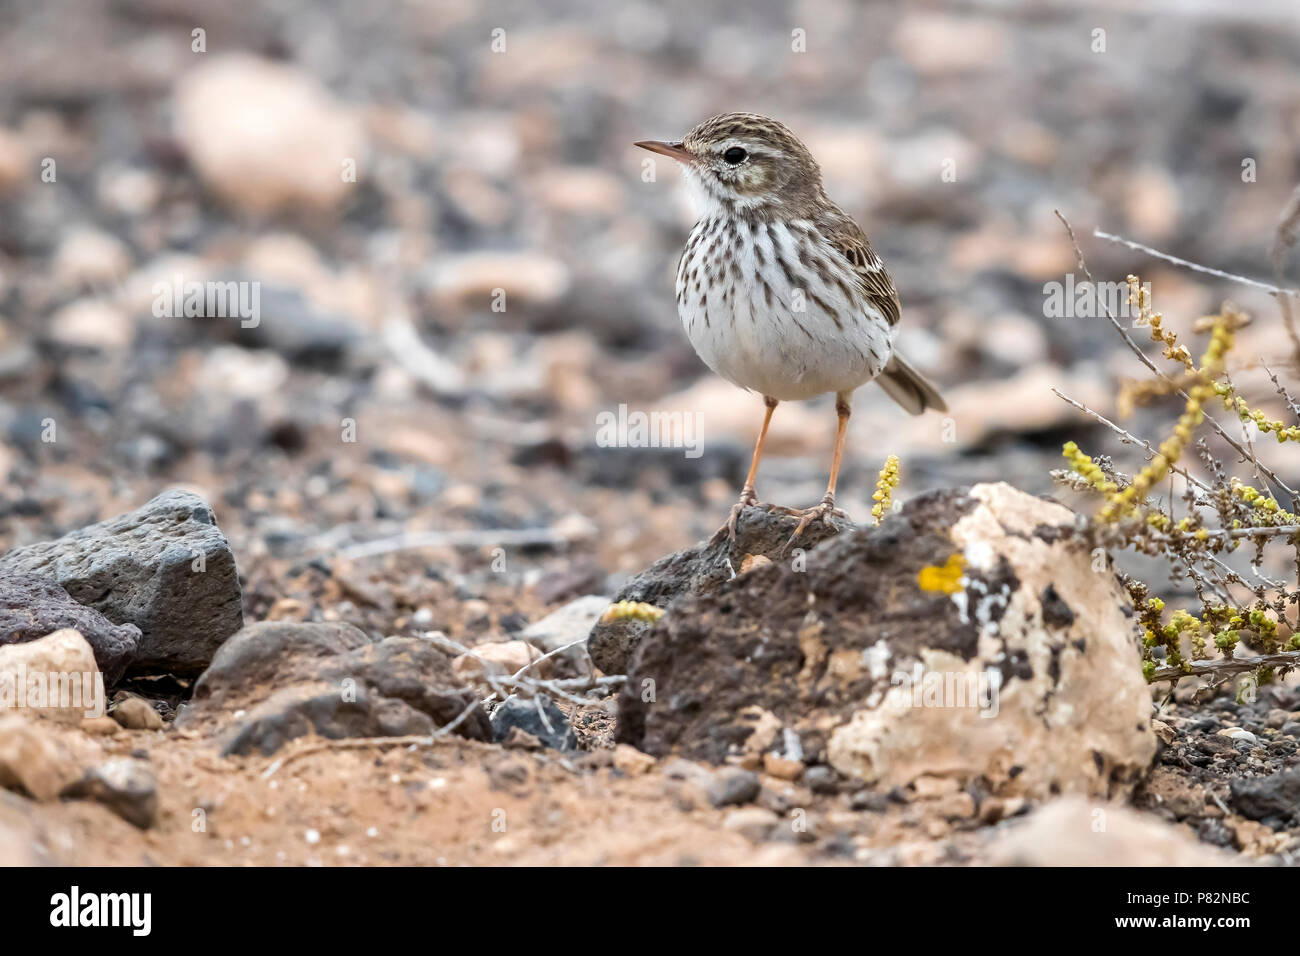 Adult winter plumage Canarian Berthelot's Pipit perched on a small rock in a gully near the airport of Puerto del Rosario, Fuerteventura, Canary Islan Stock Photo